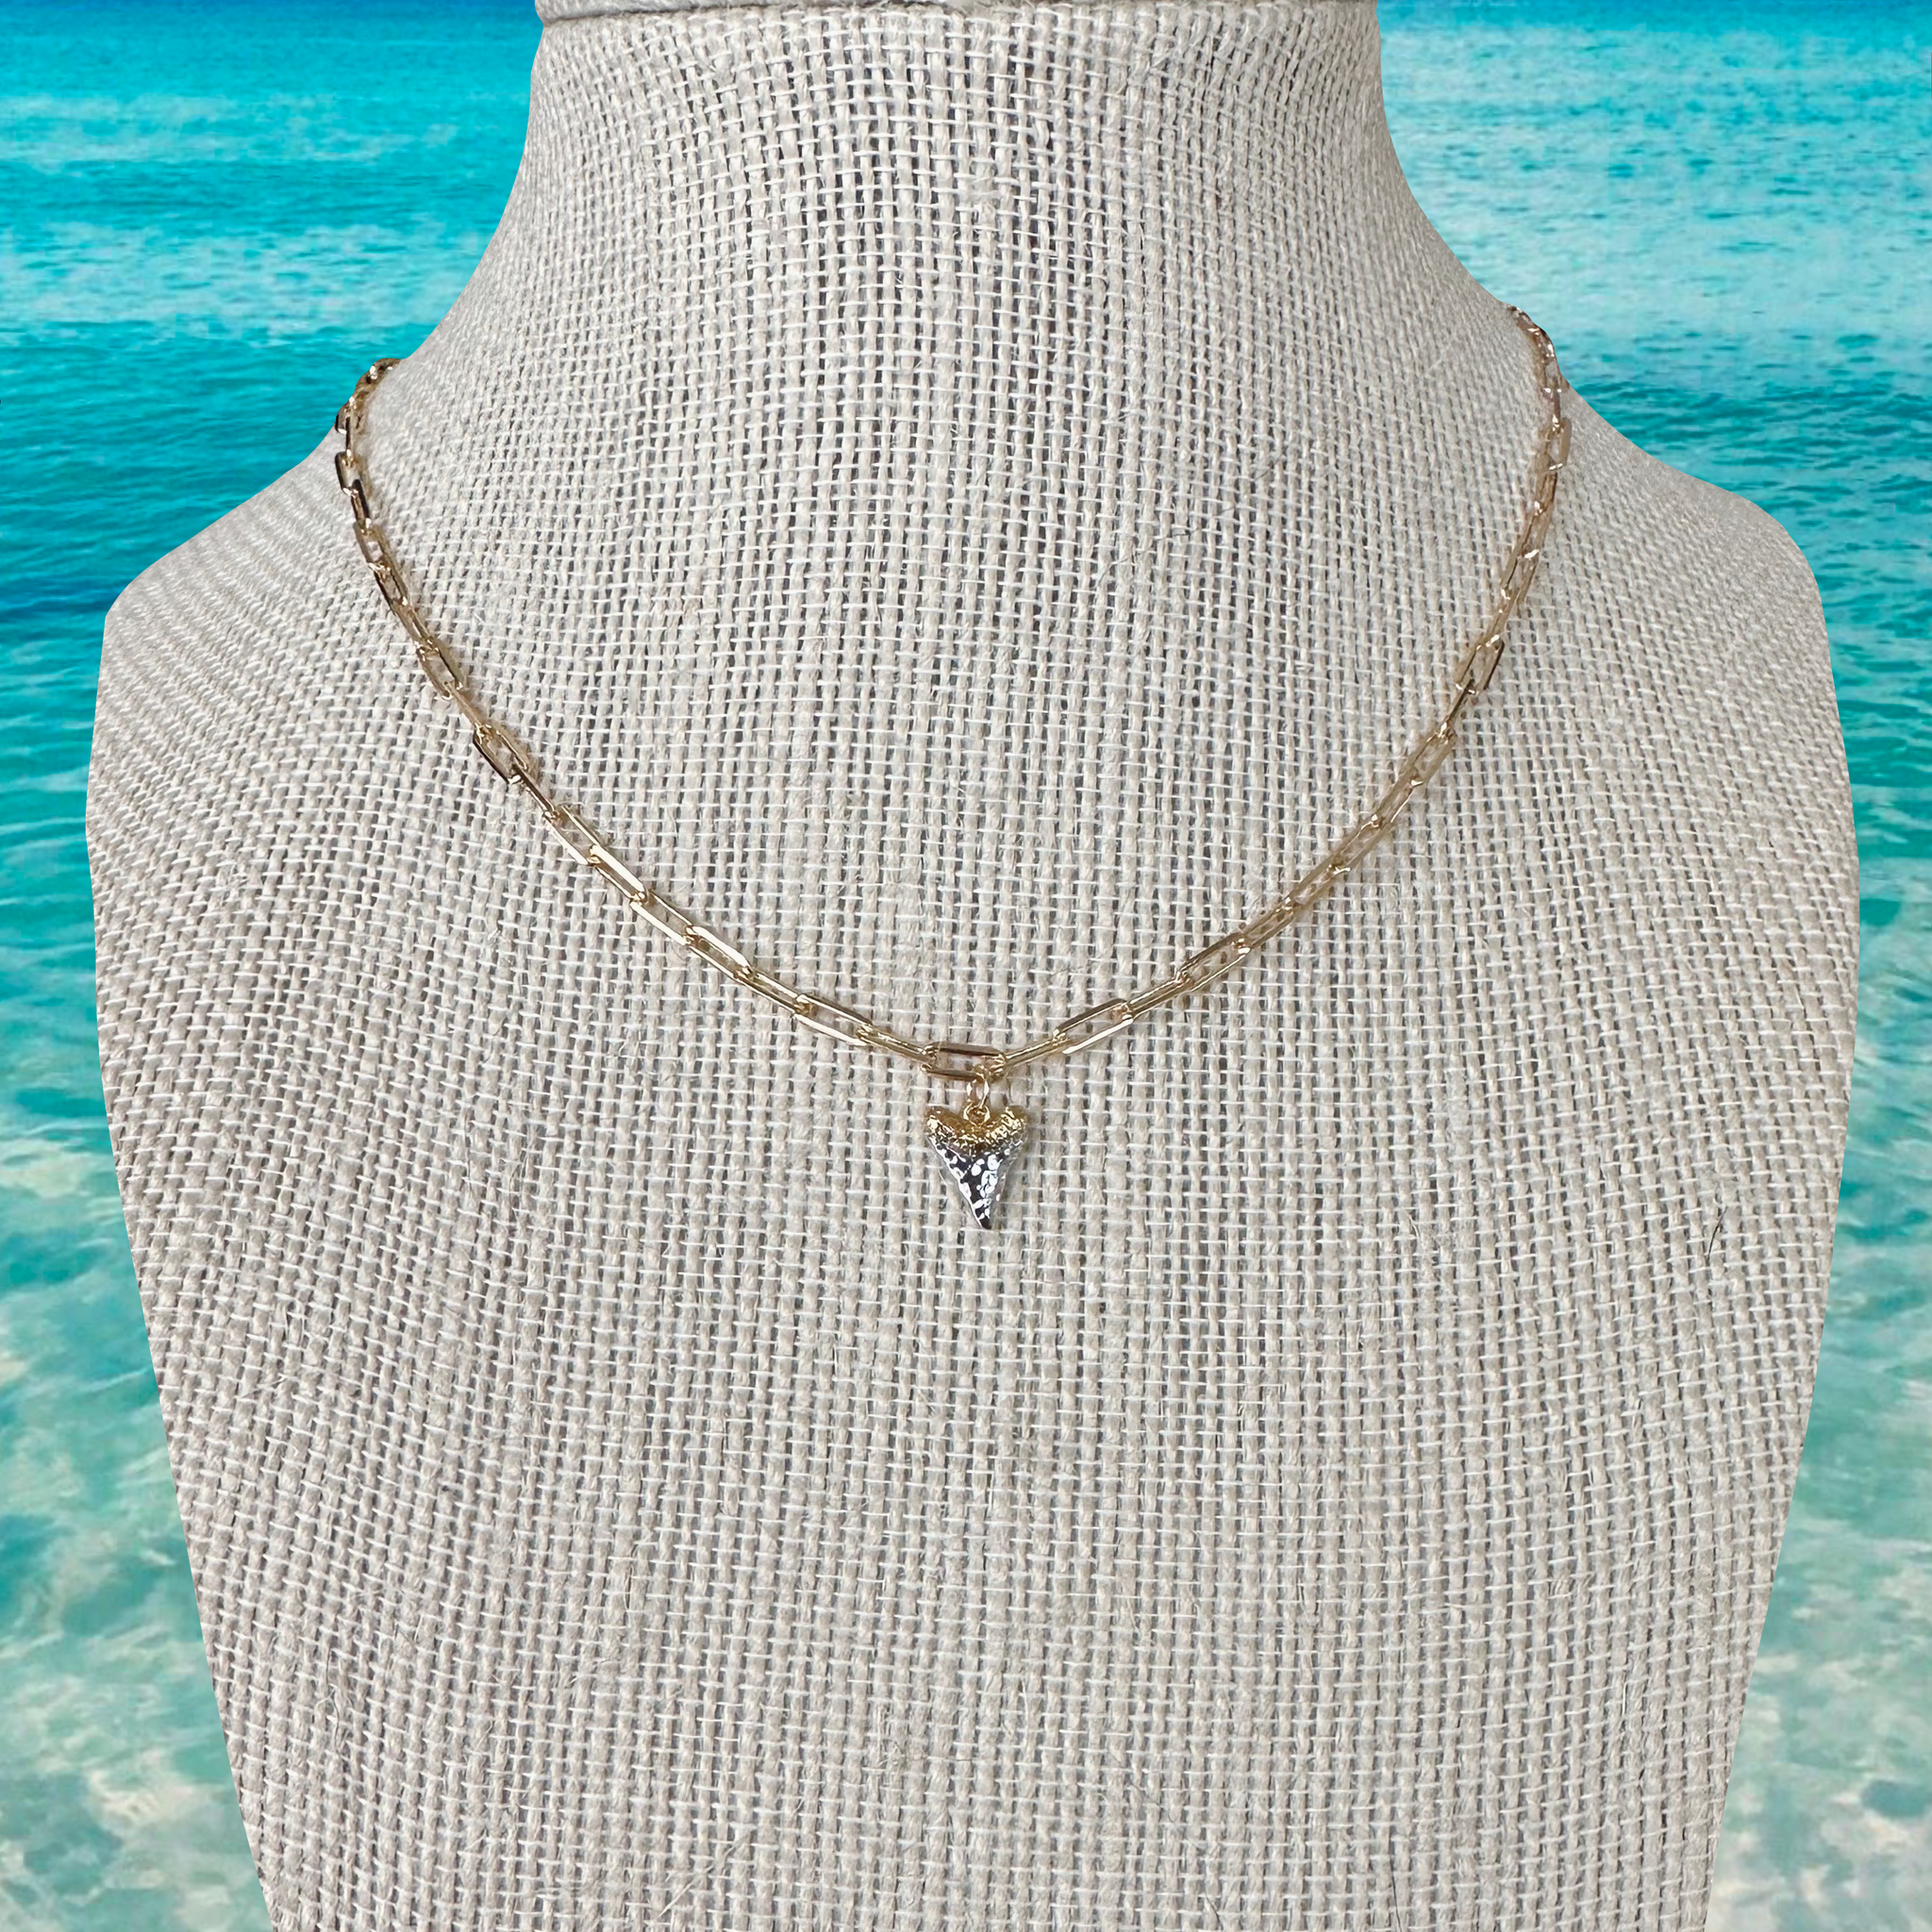 GOLD SHARK TOOTH NECKLACE